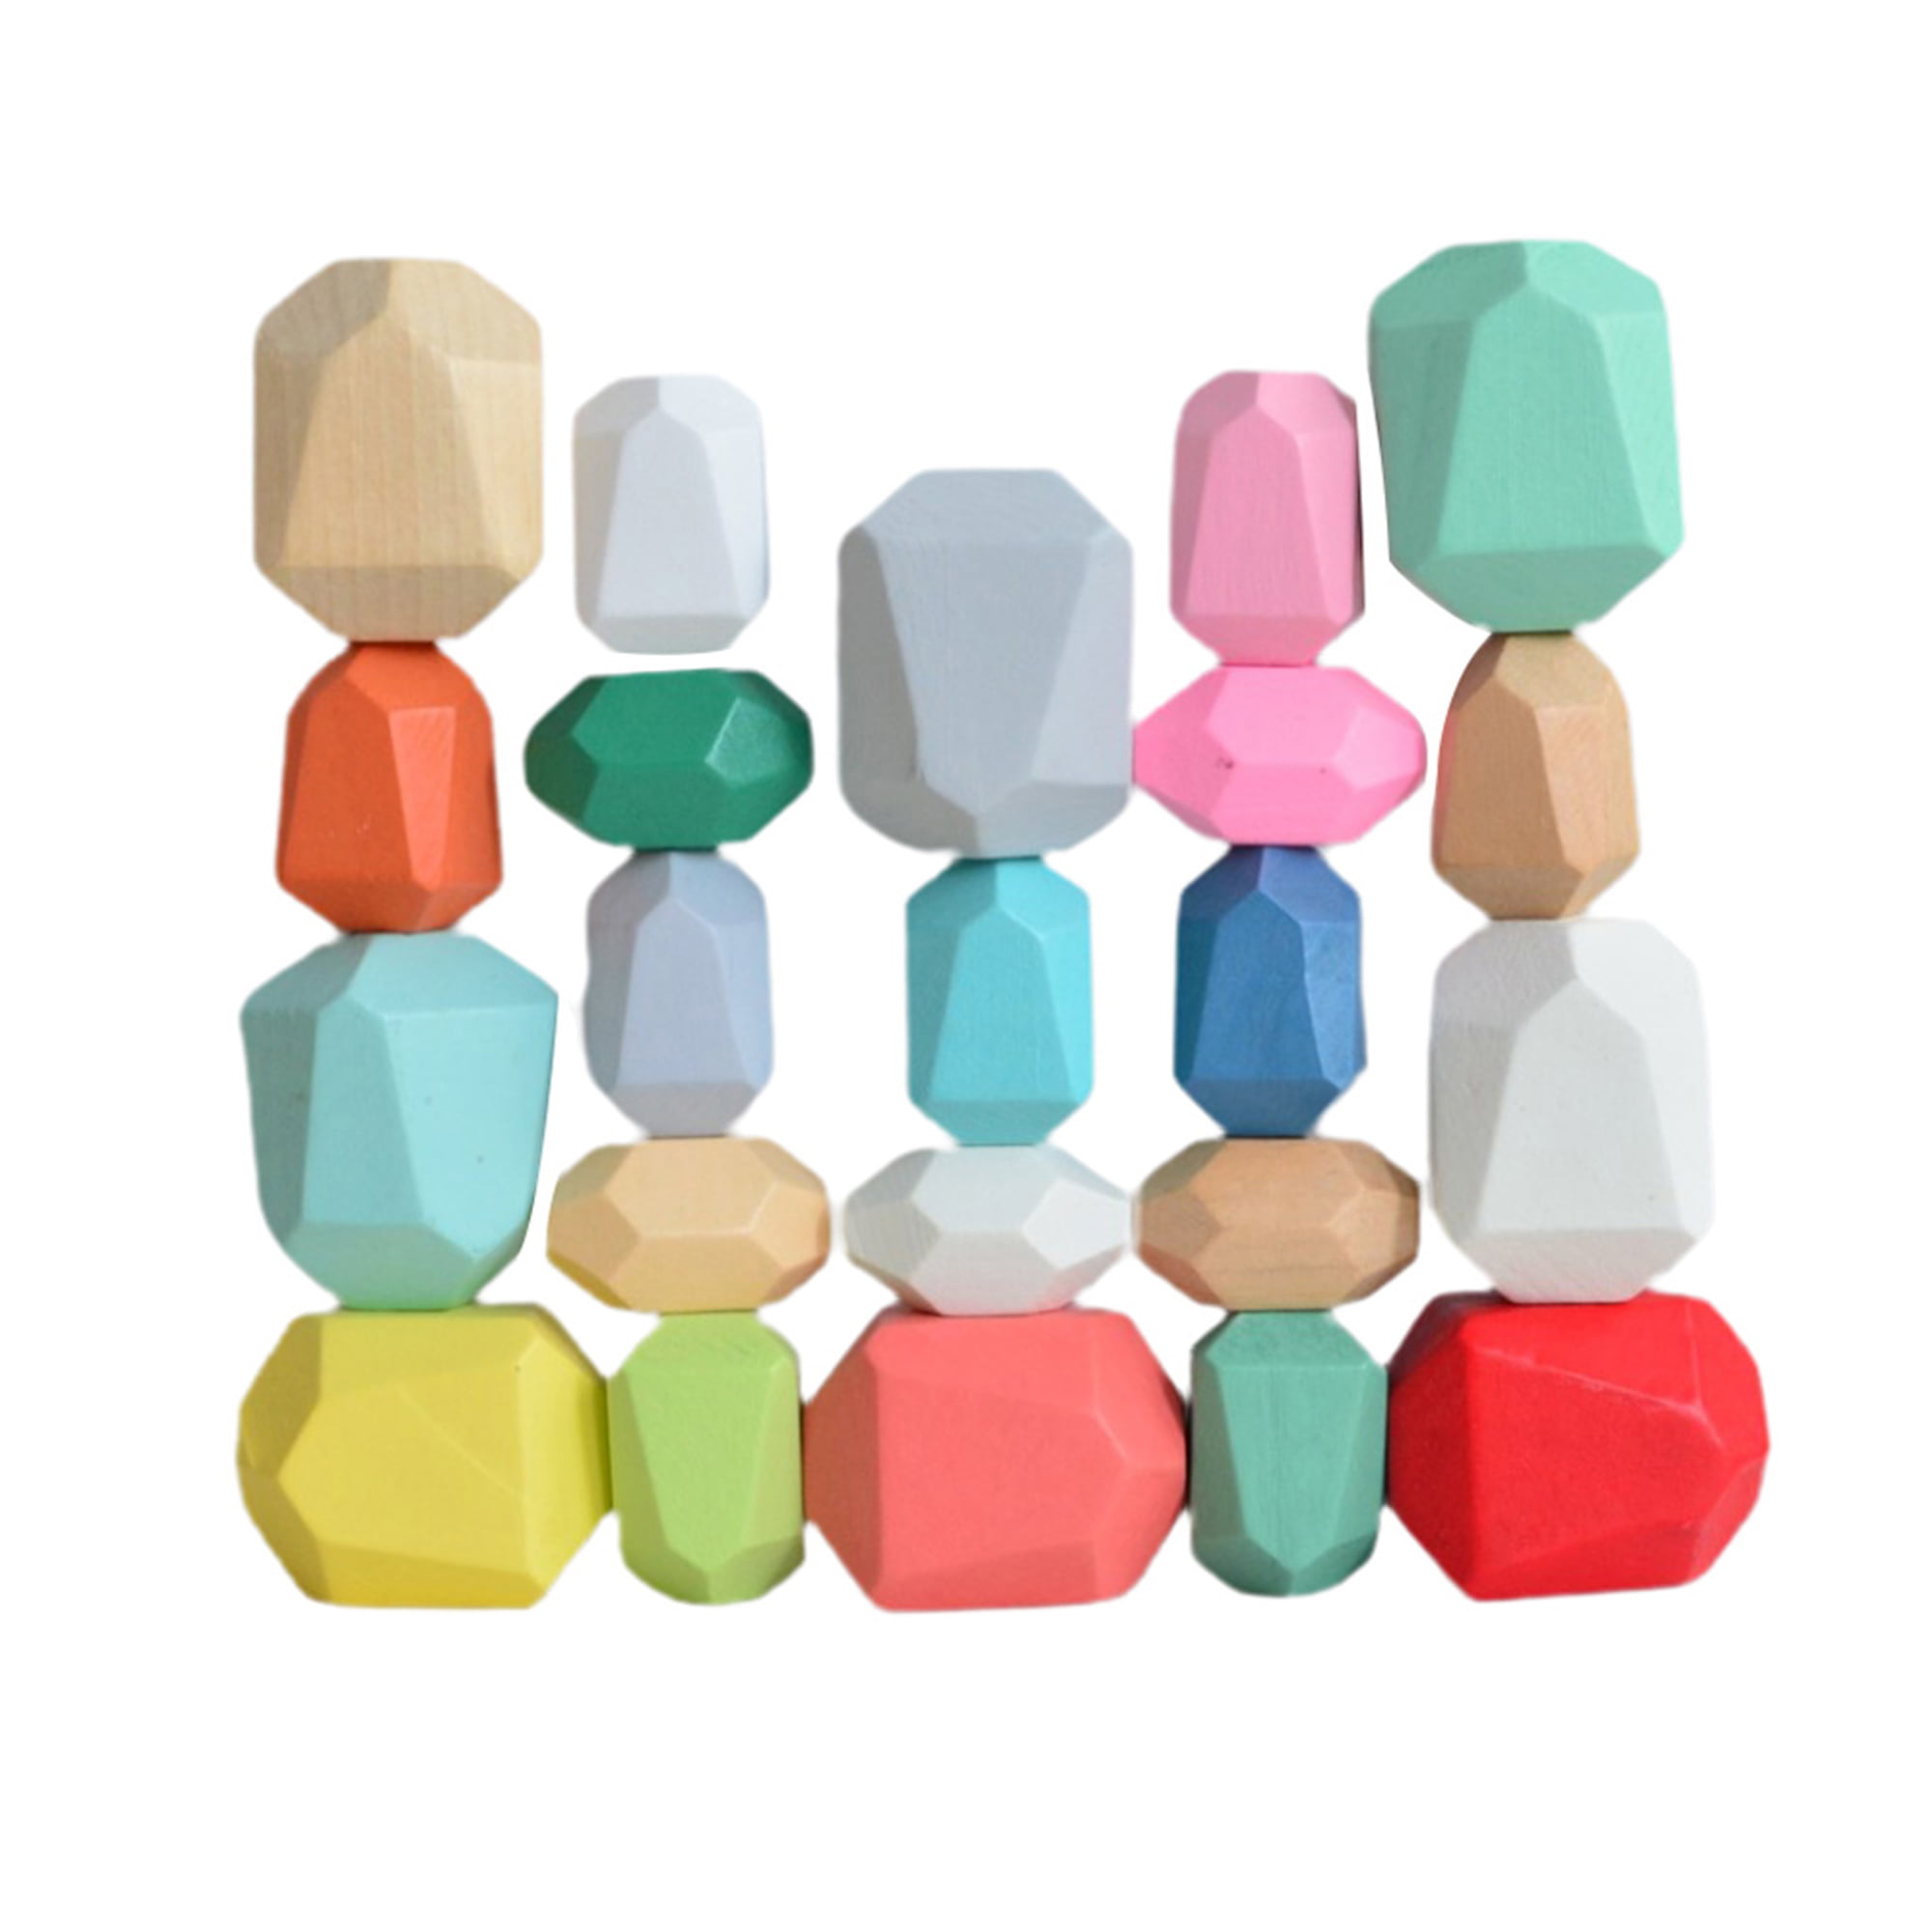 16Pcs Wooden Balancing Blocks Colored Wooden Stones Stacking Game Children Educational Toy Gift Suitable Decoration for Bedroom Tables Beds Natural and Safe Healthy and Non‑Toxic 1